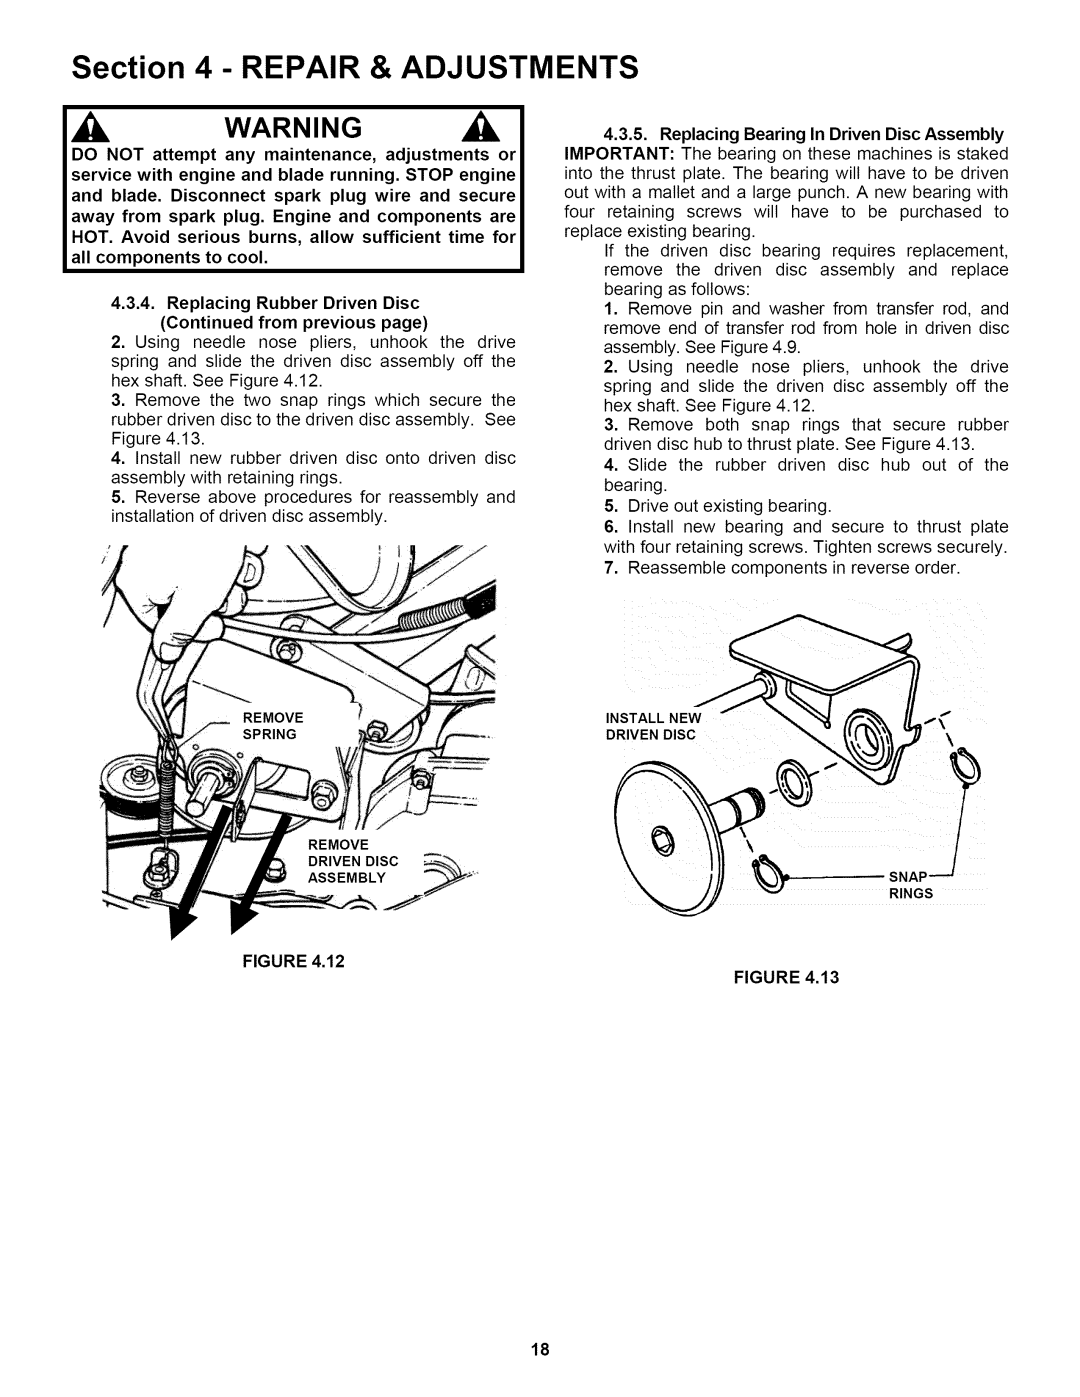 Snapper P216518B important safety instructions Repair & Adjustments, Figure 